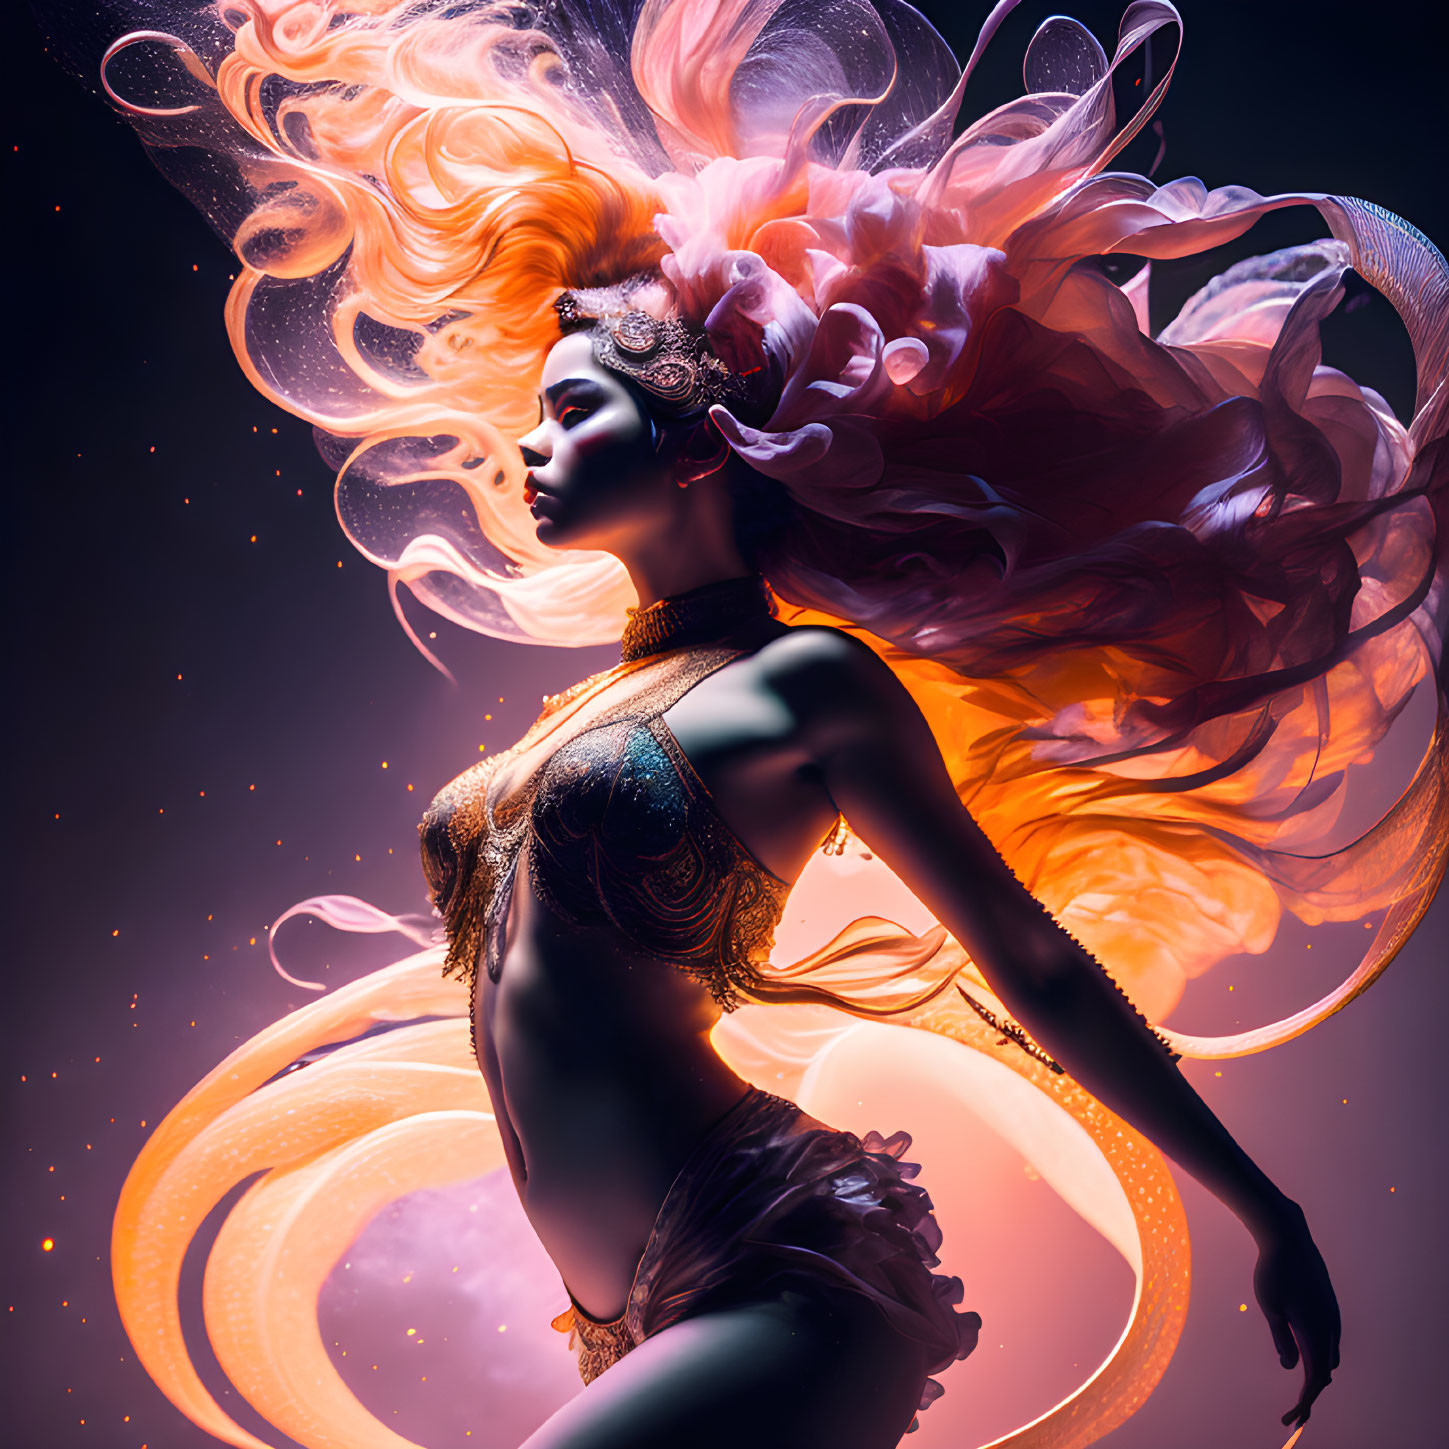 Digital Artwork: Woman with Orange Hair in Gold Attire on Starry Background